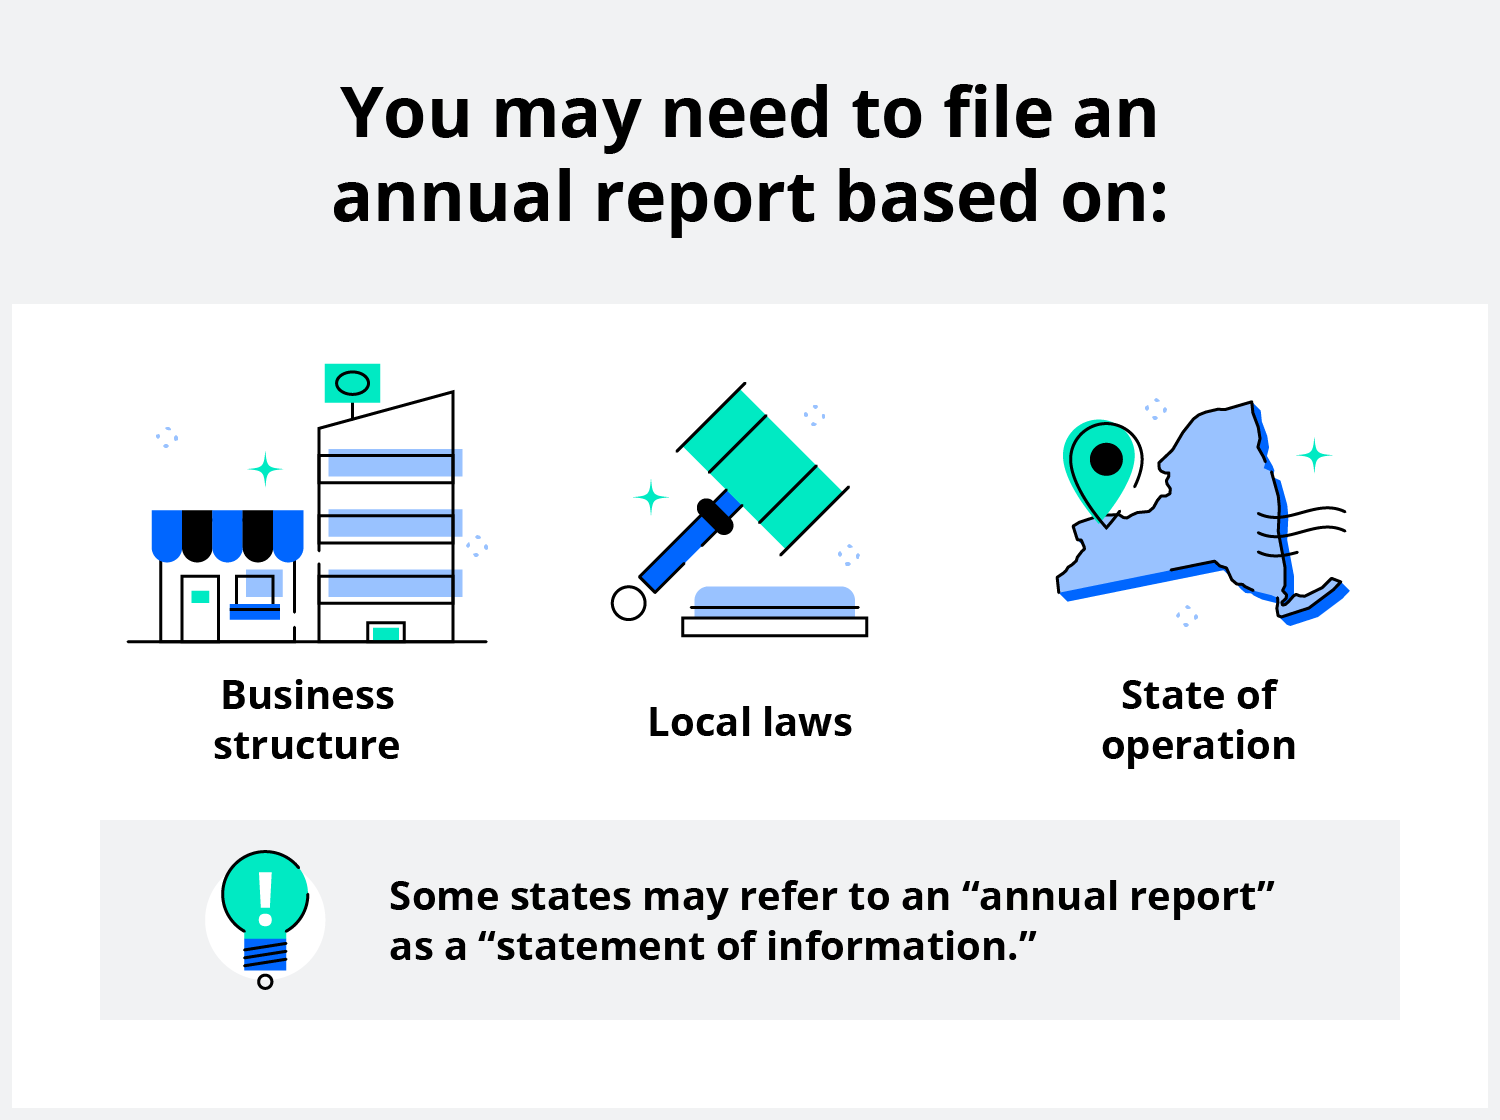 LLCs, nonprofits, and corporations are required to file annual reports.